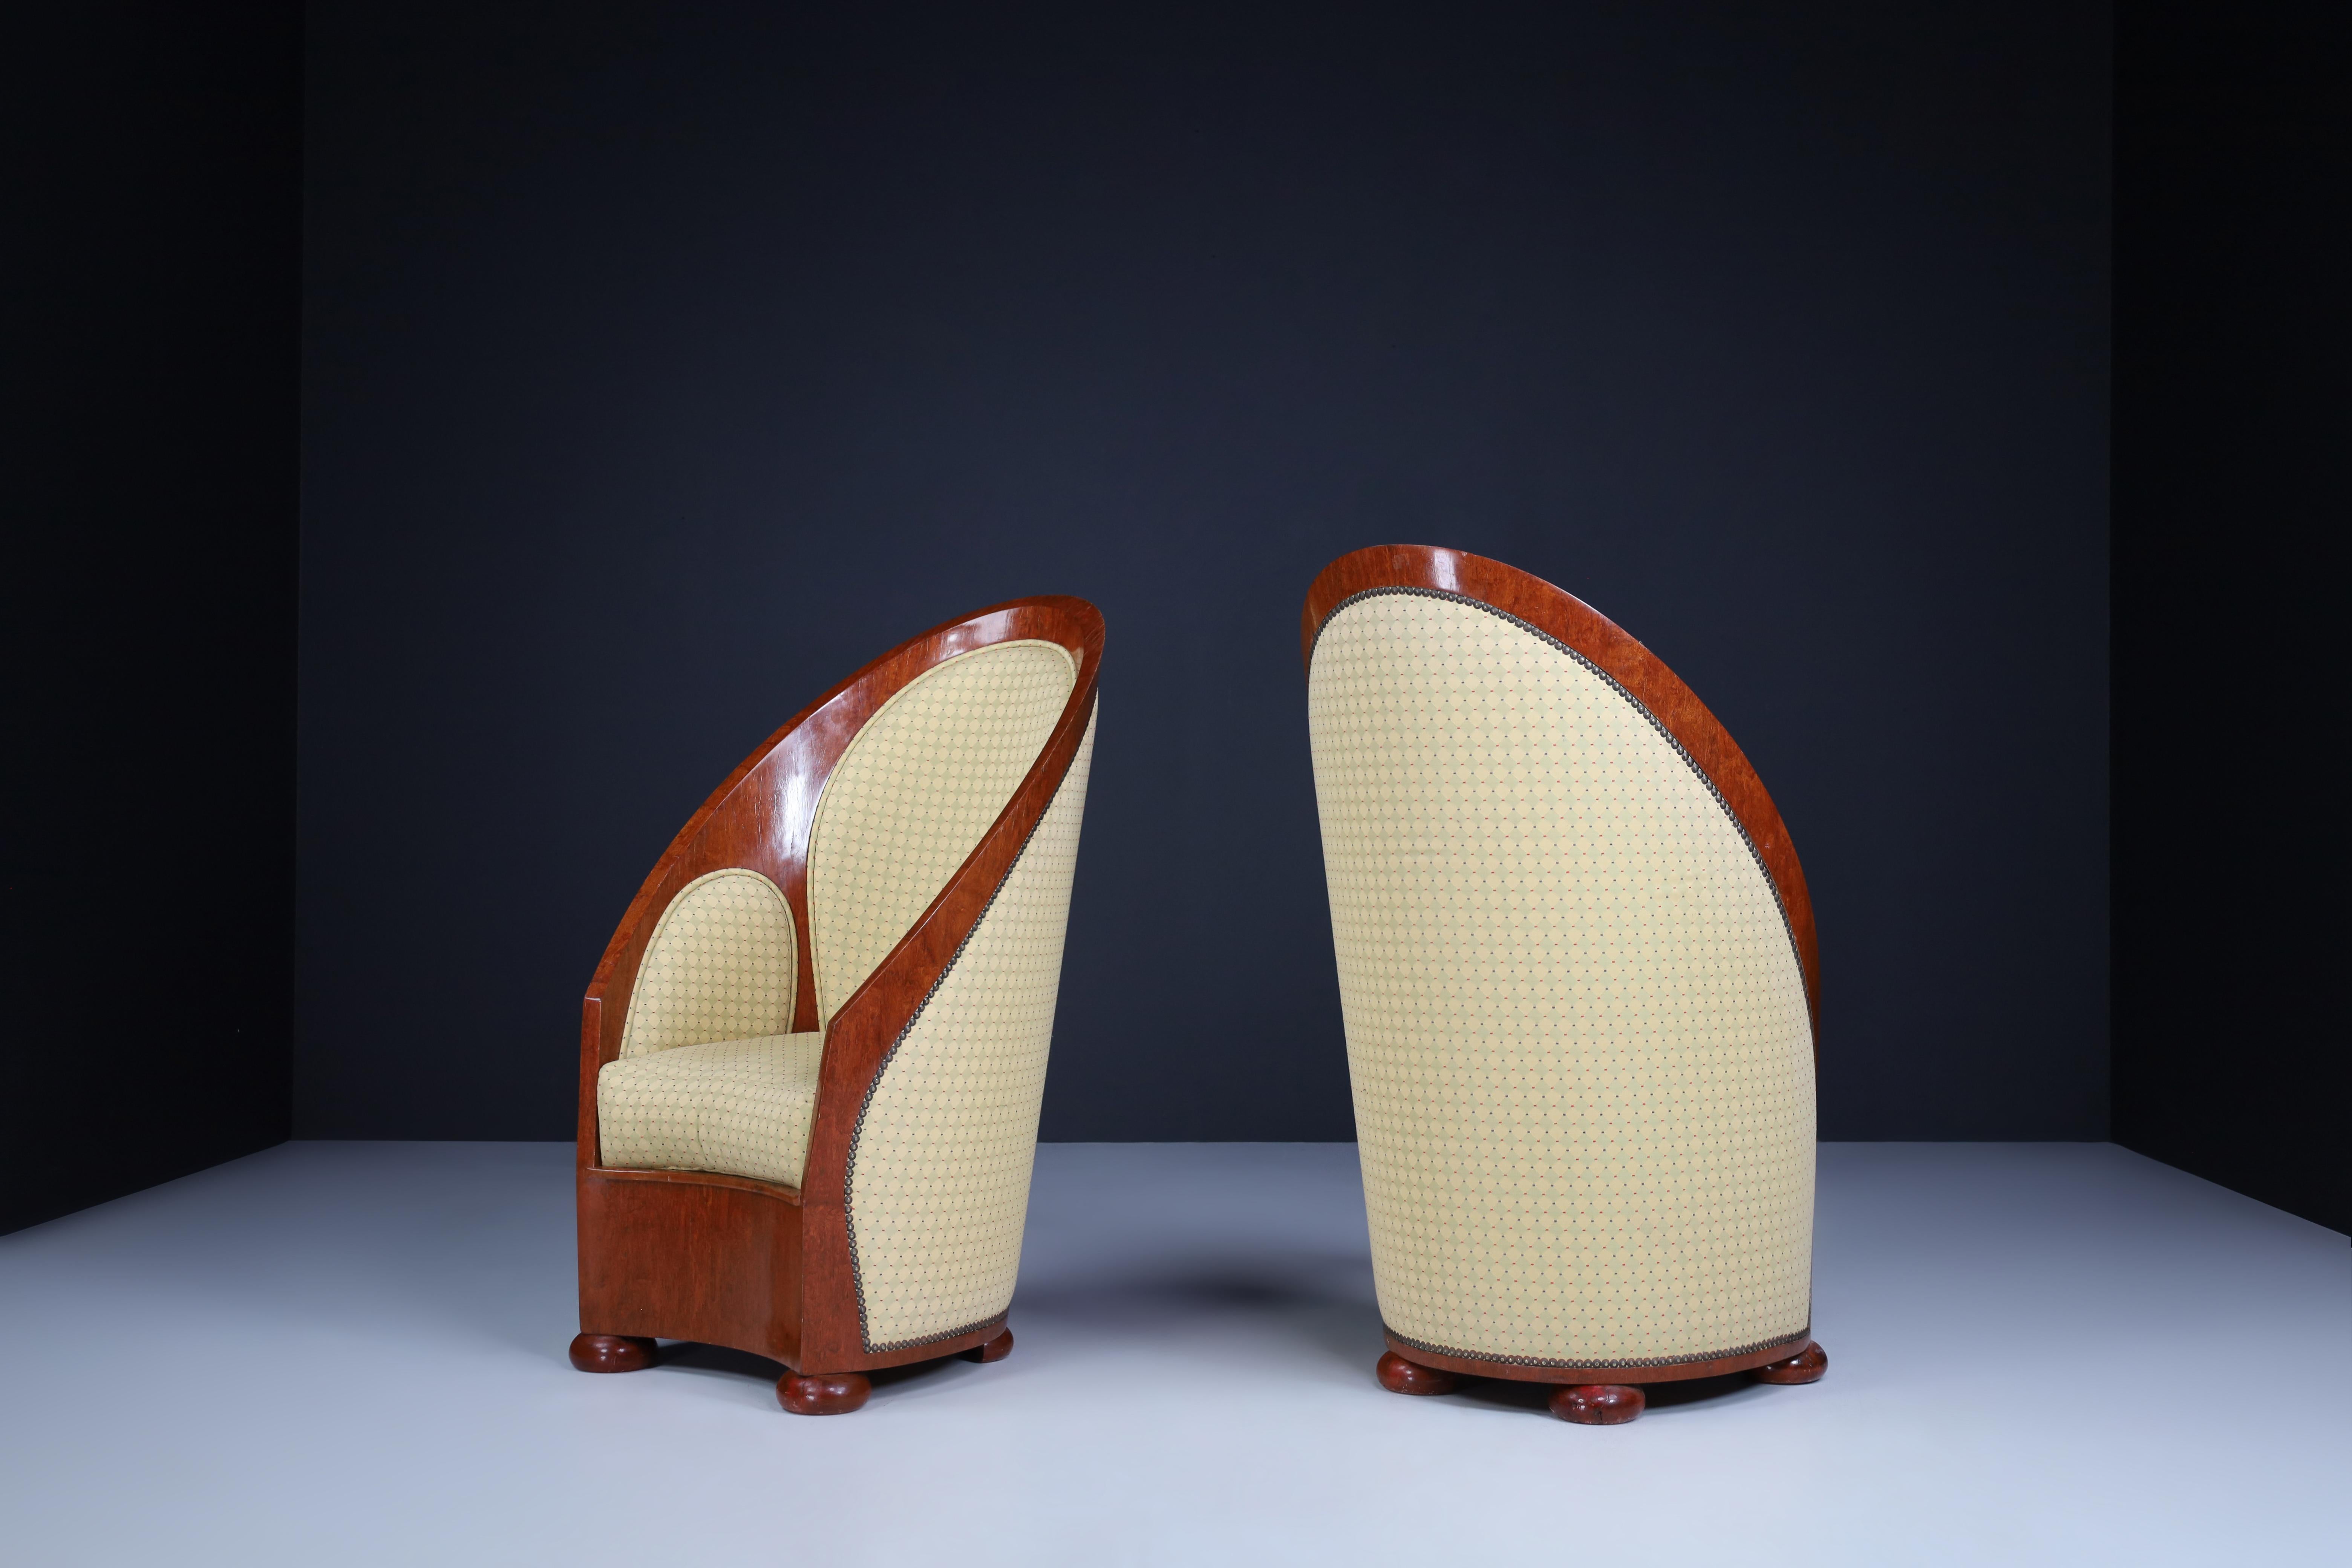 20th Century Art Deco Armchairs in Walnut and Original Upholstery, Italy, 1930s For Sale